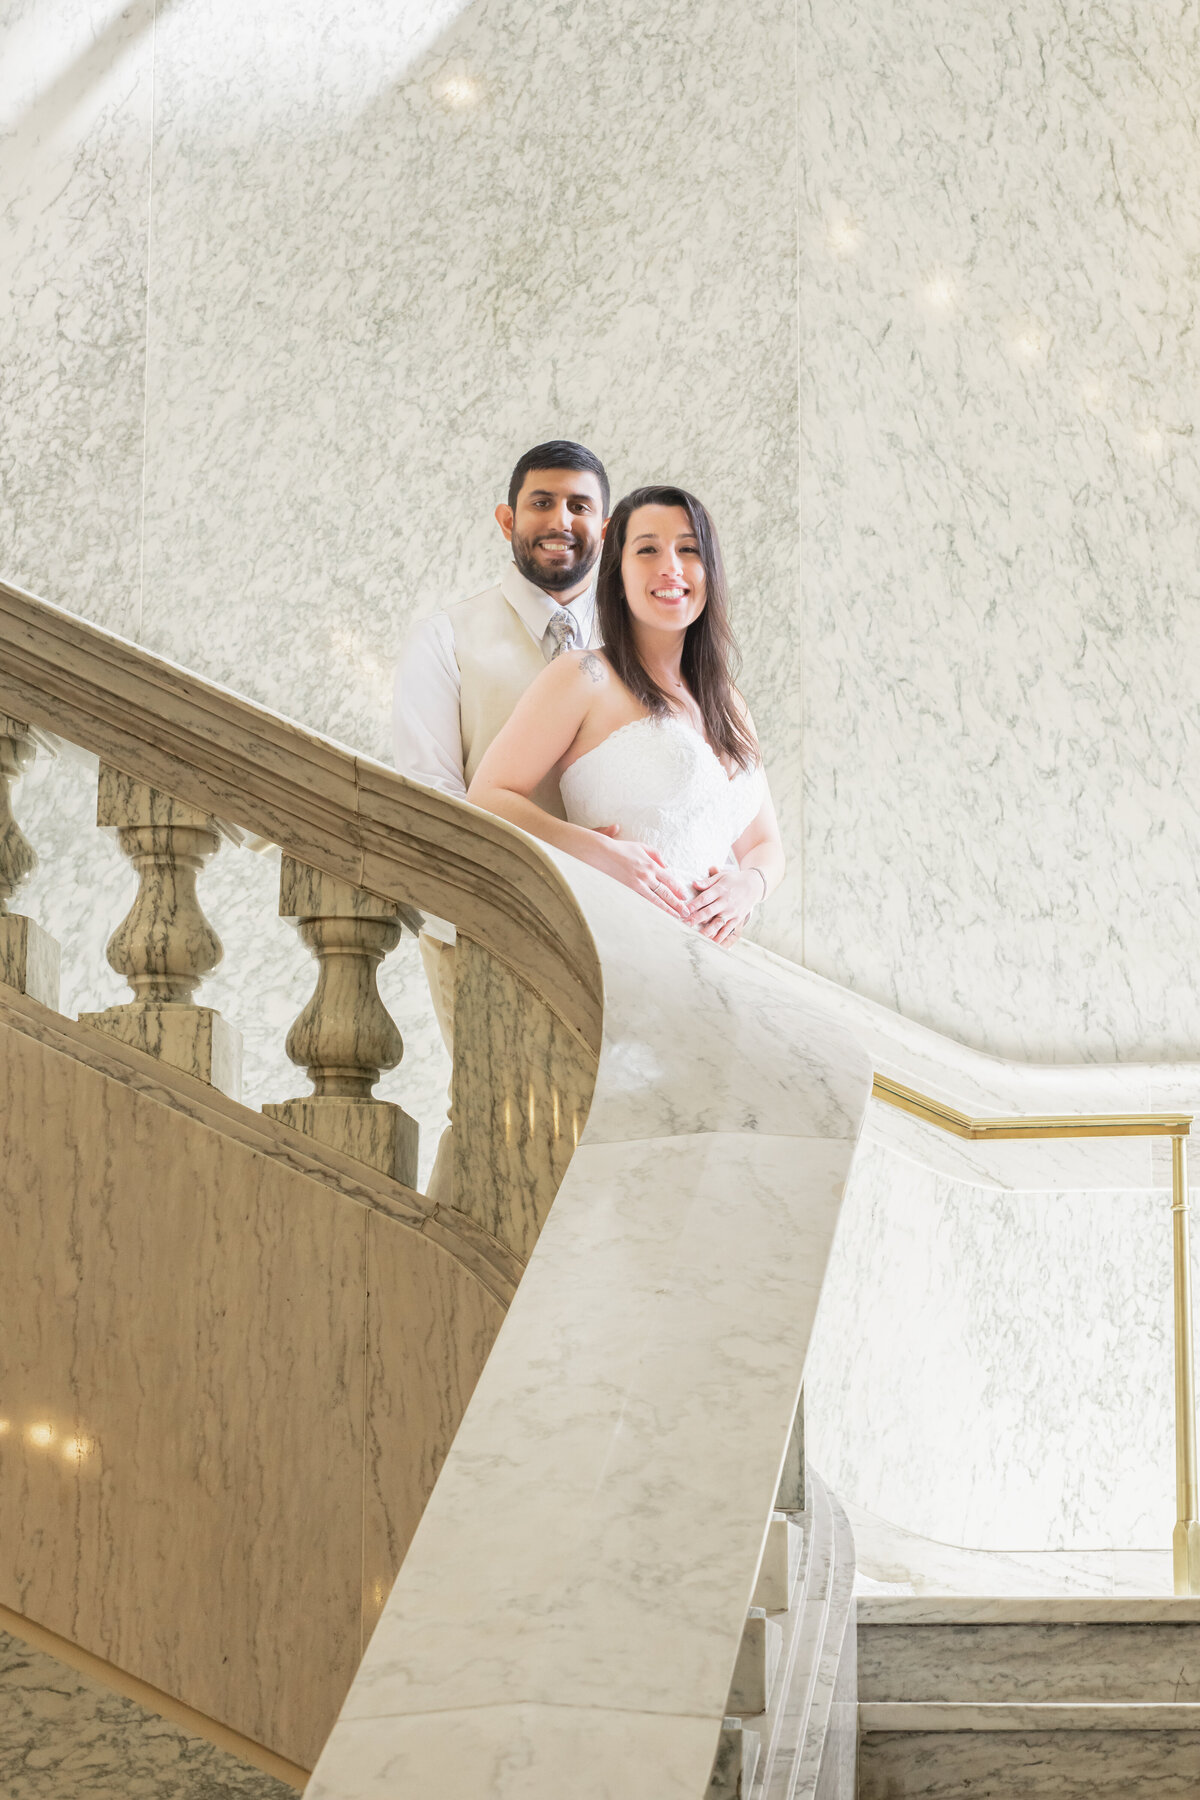 Elegant and traditional couple portrait at the Sf City Hall.